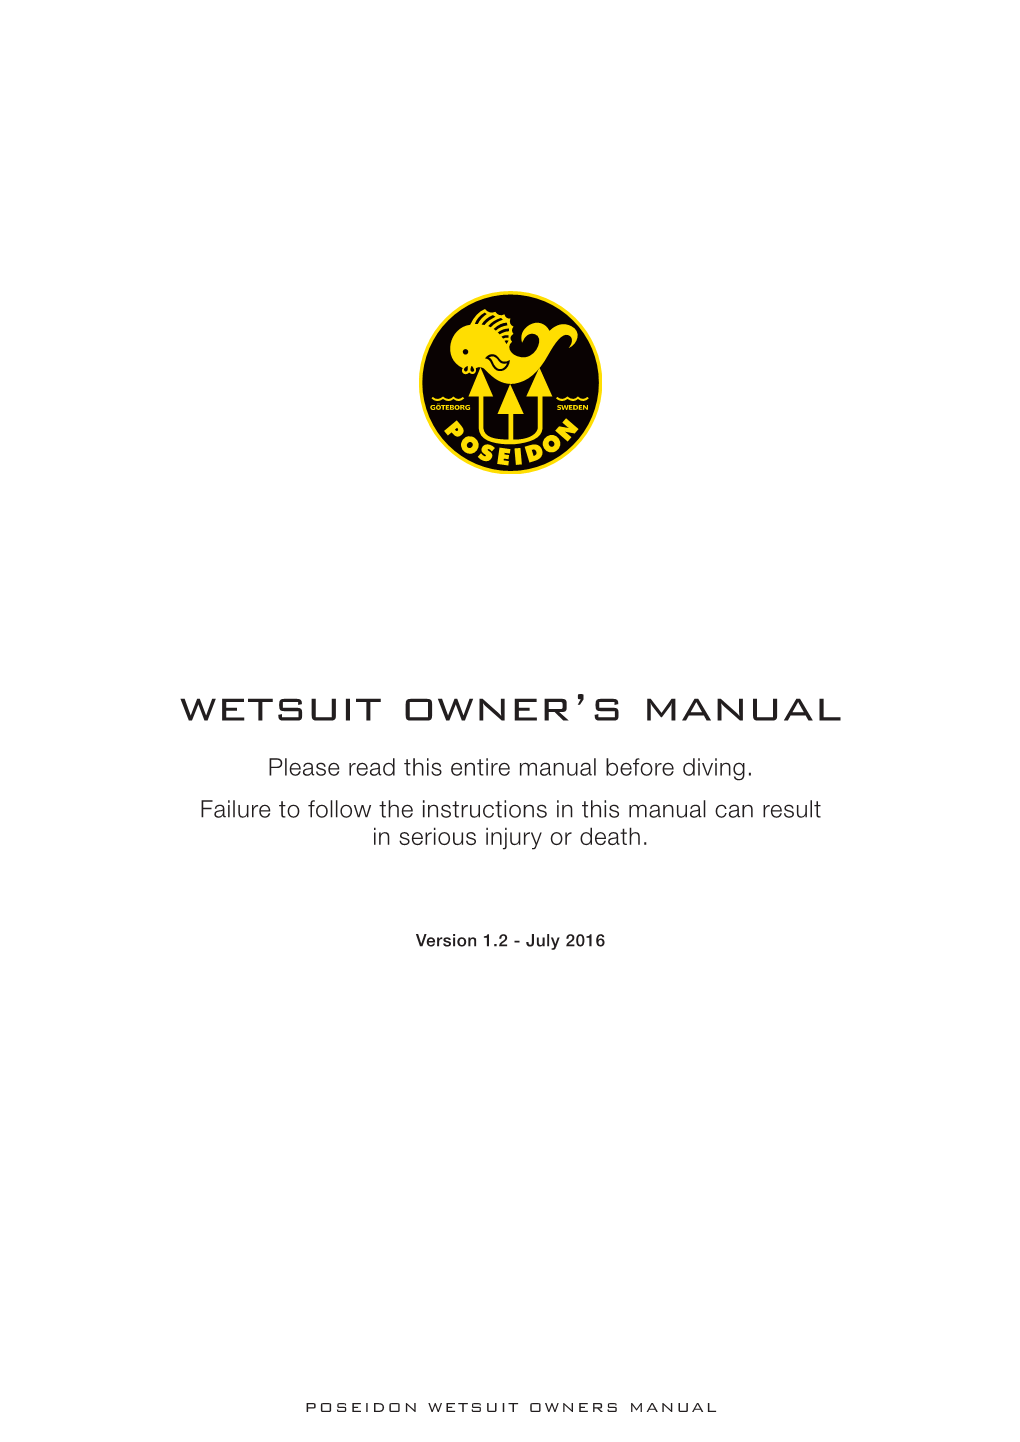 Wetsuit Owner's Manual